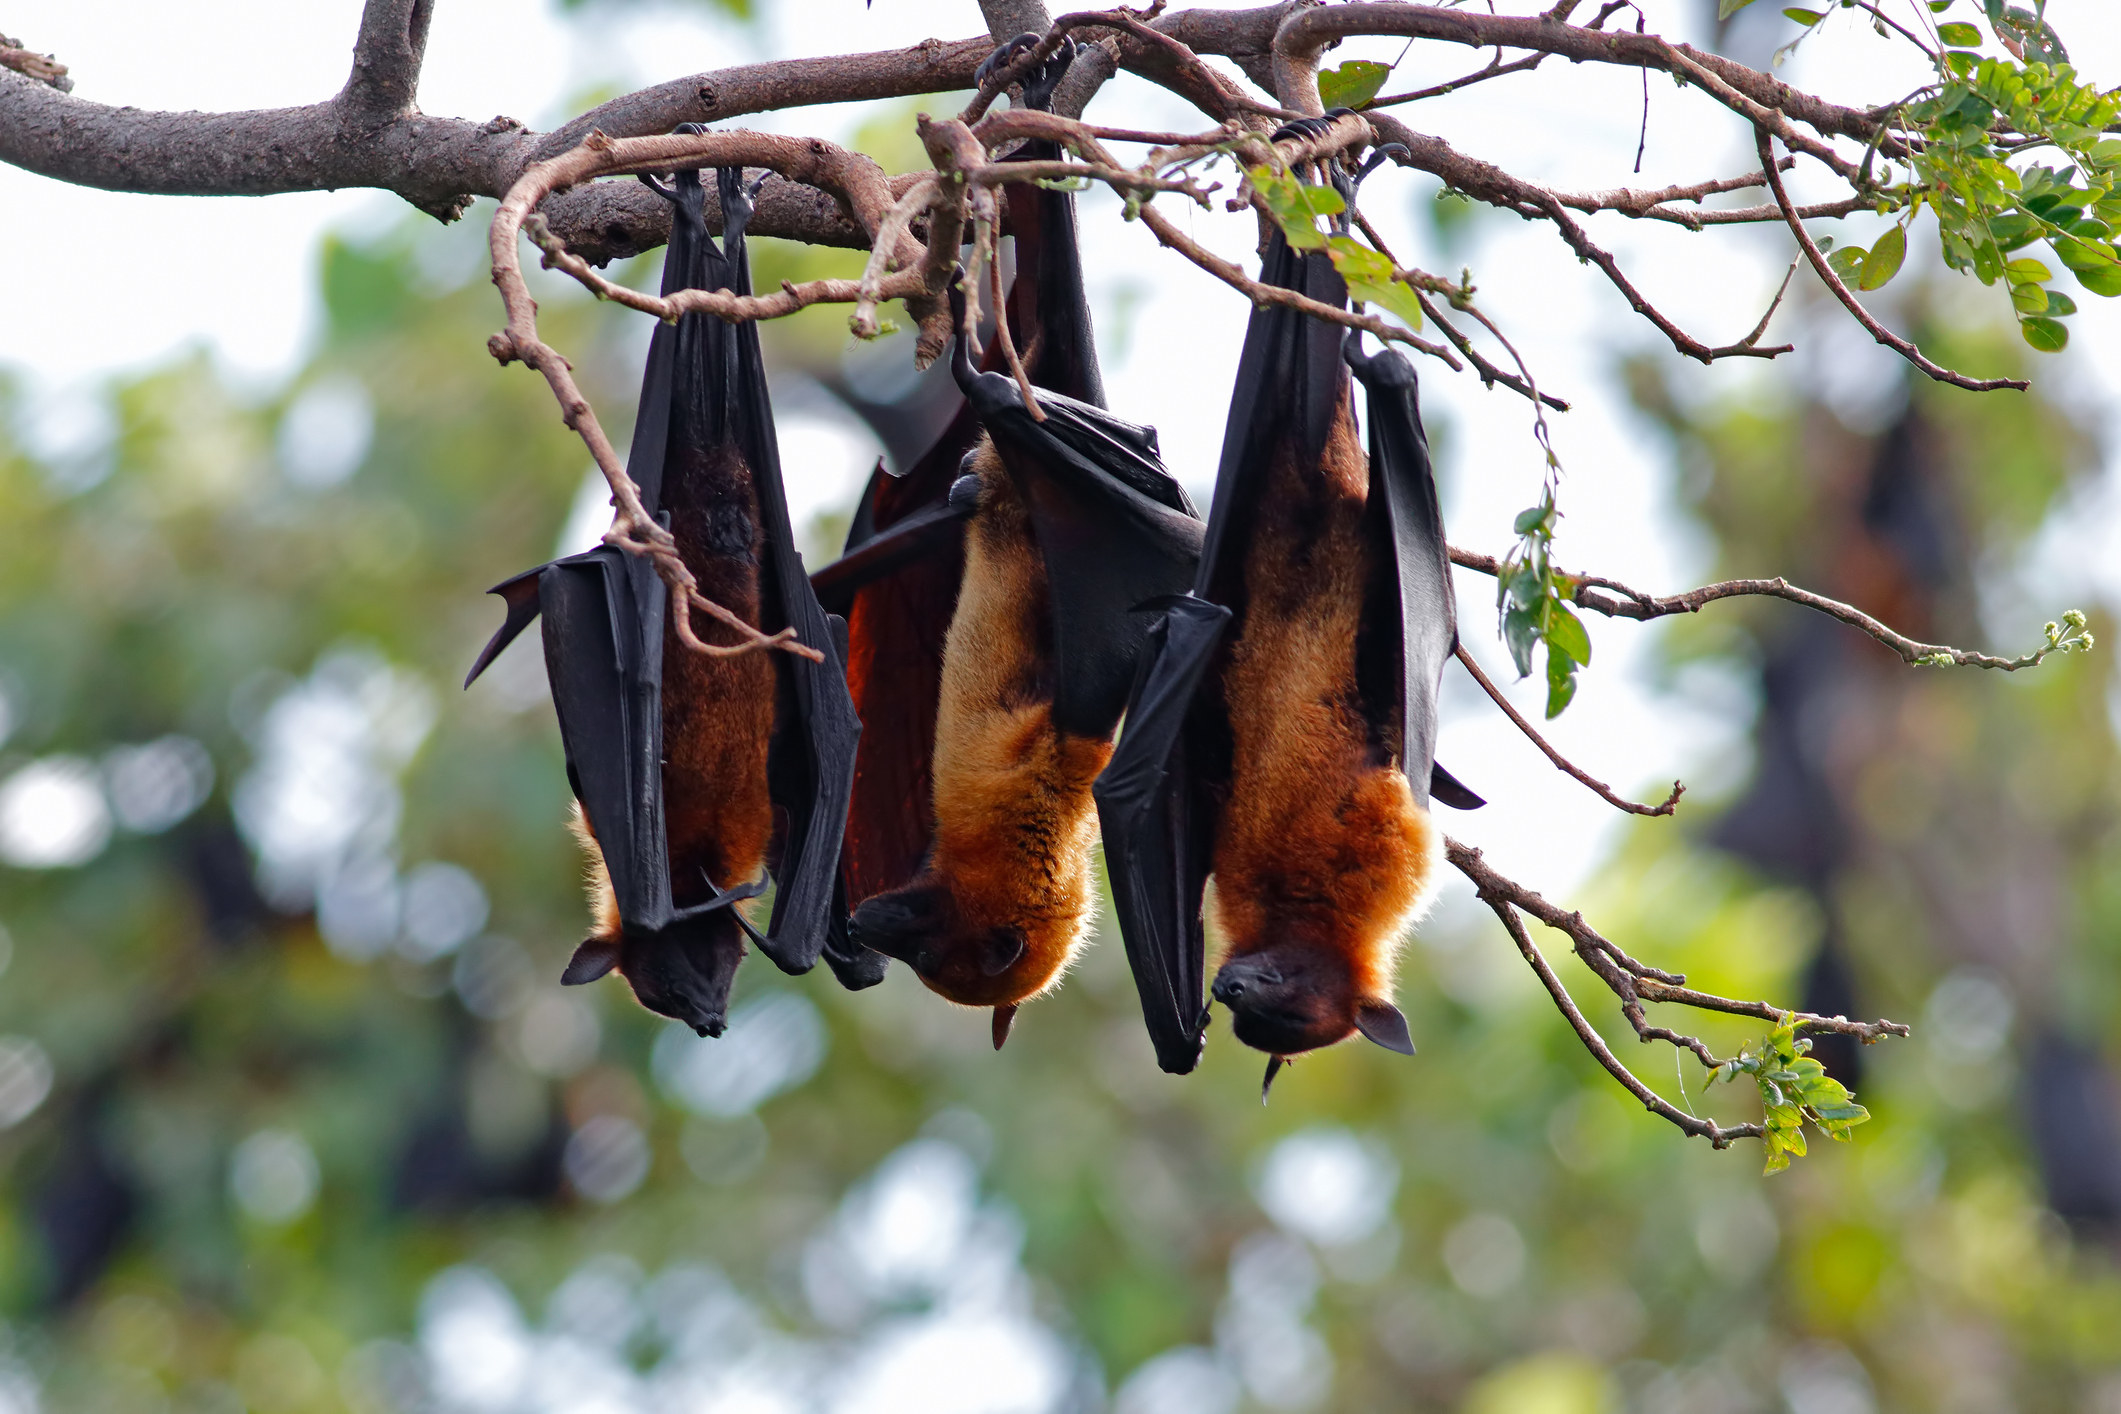 bats hanging from a tree